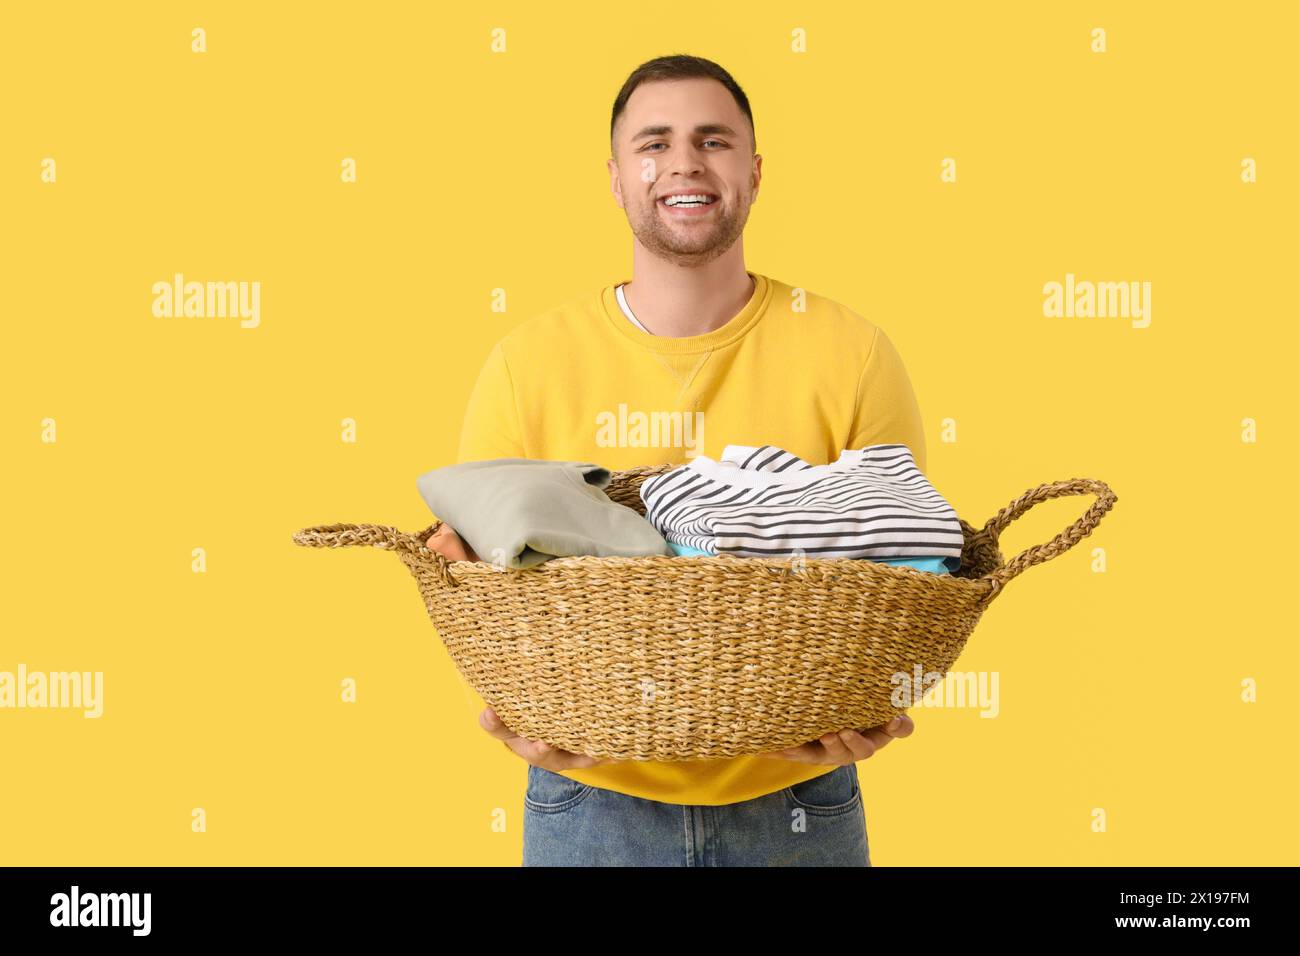 Young man holding basket with clothes on yellow background Stock Photo